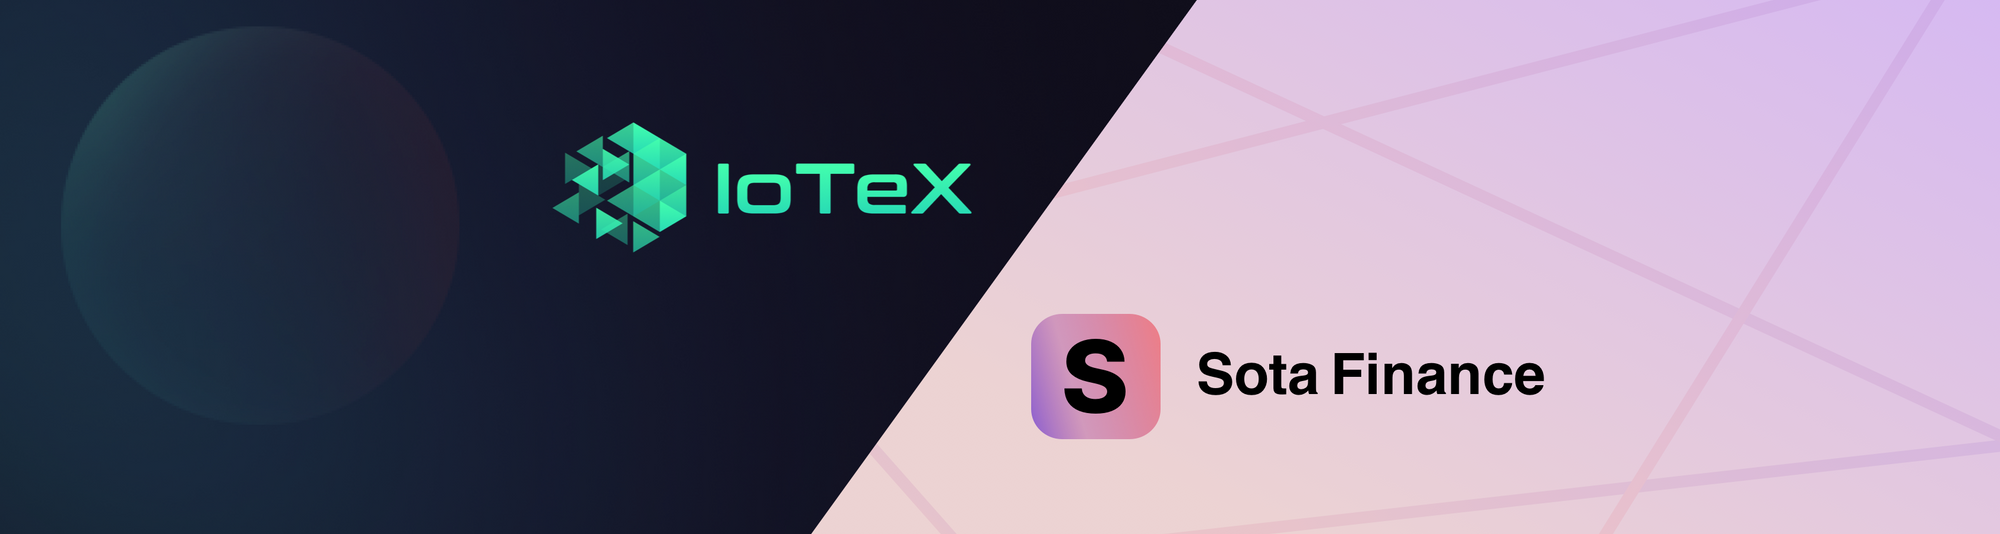 Introducing IoTeX's First NFT Marketplace: SOTA Finance